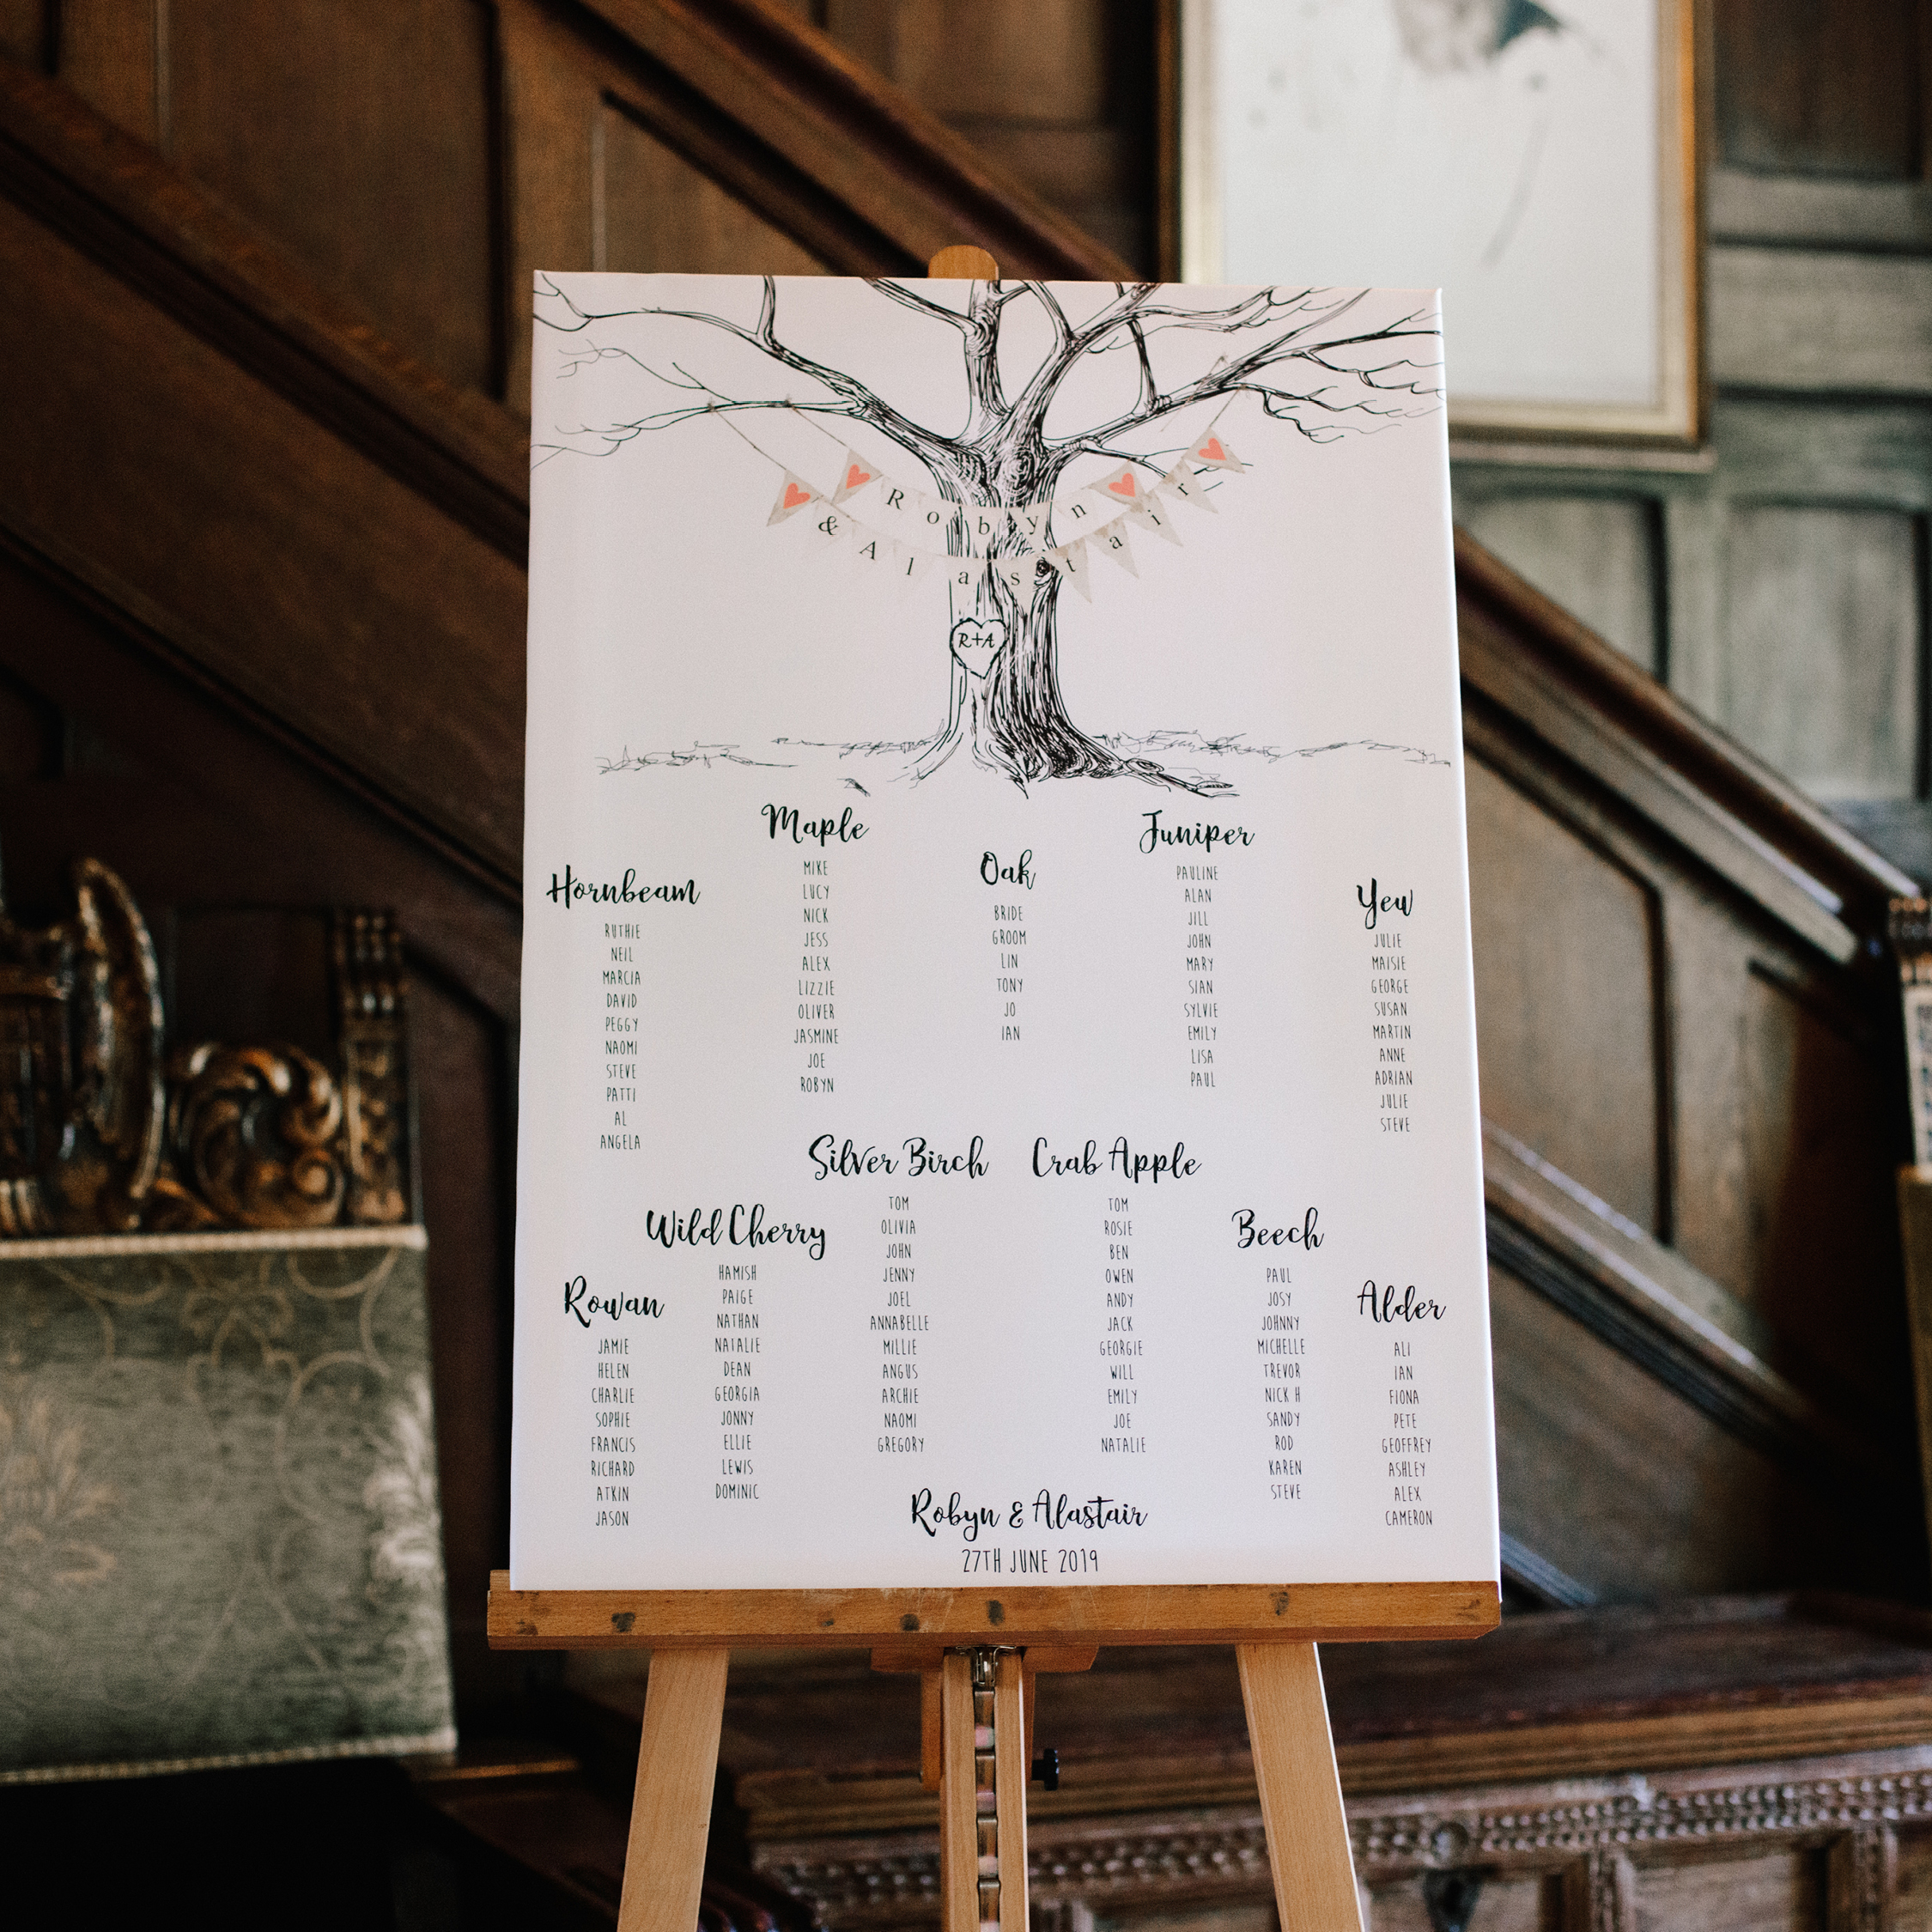 Mother of the bride’s responsibilities, wedding seating plan, Seating plan list challenges